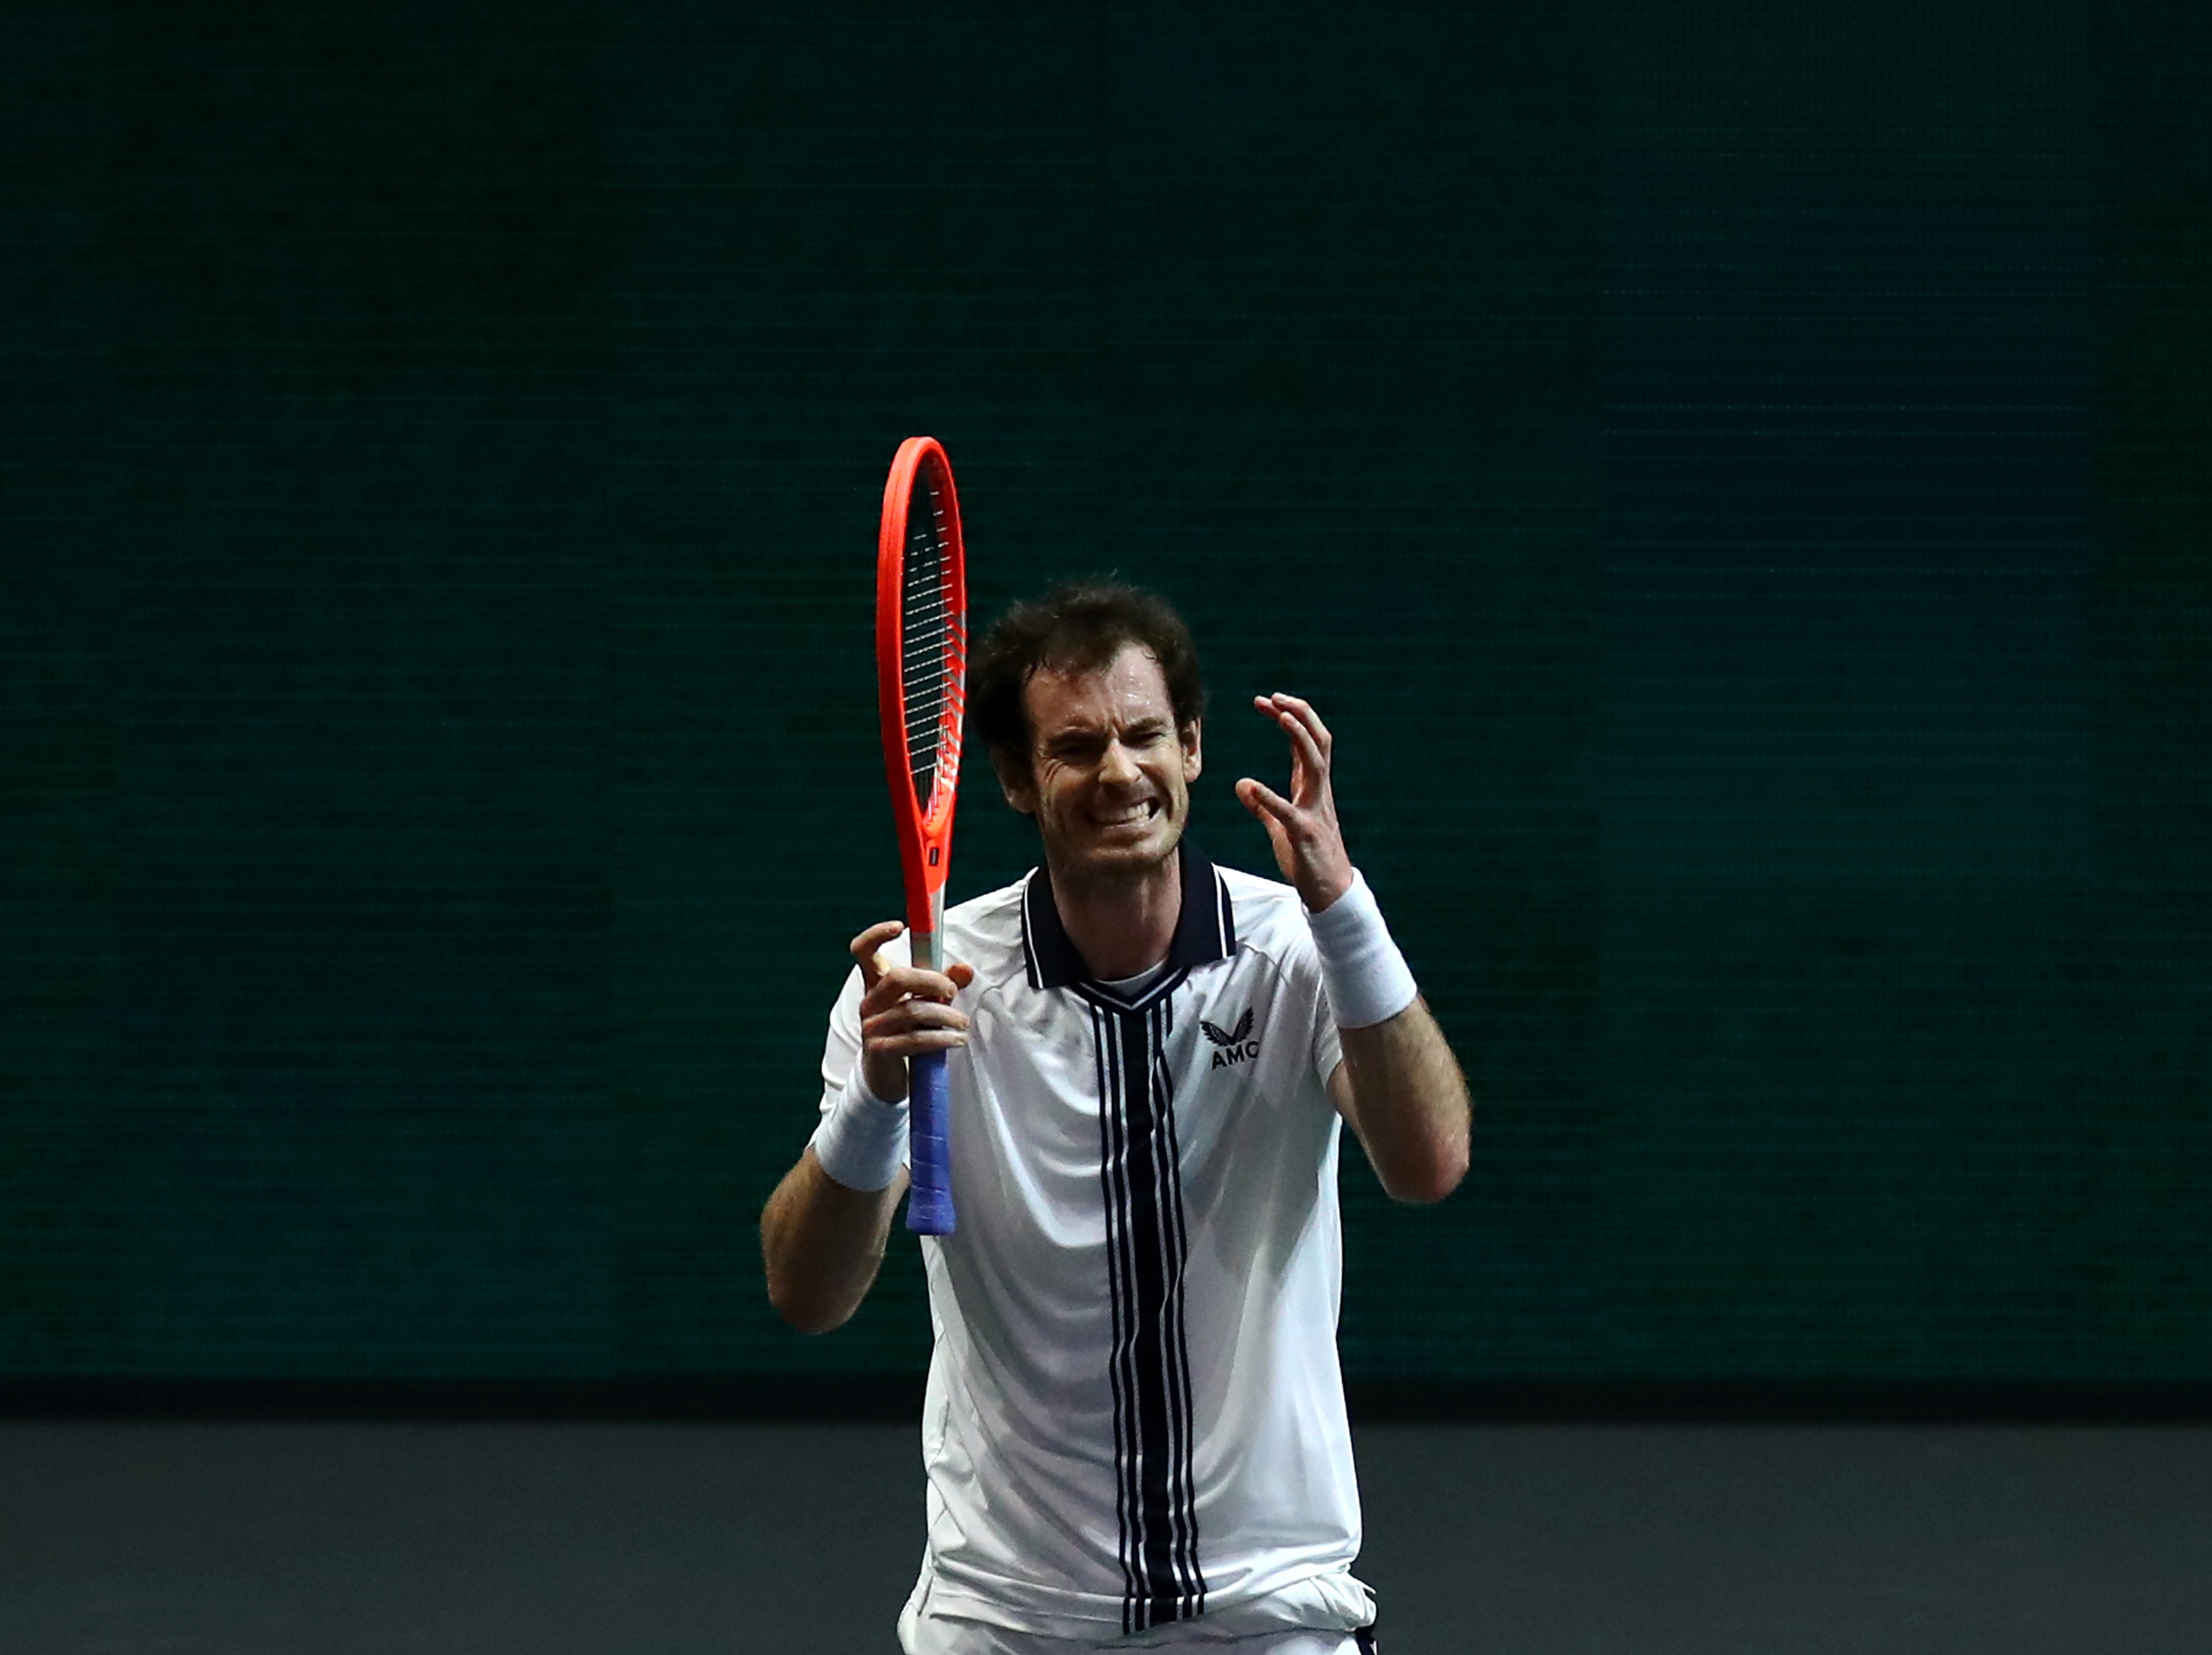 Andy Murray reacts to losing a point